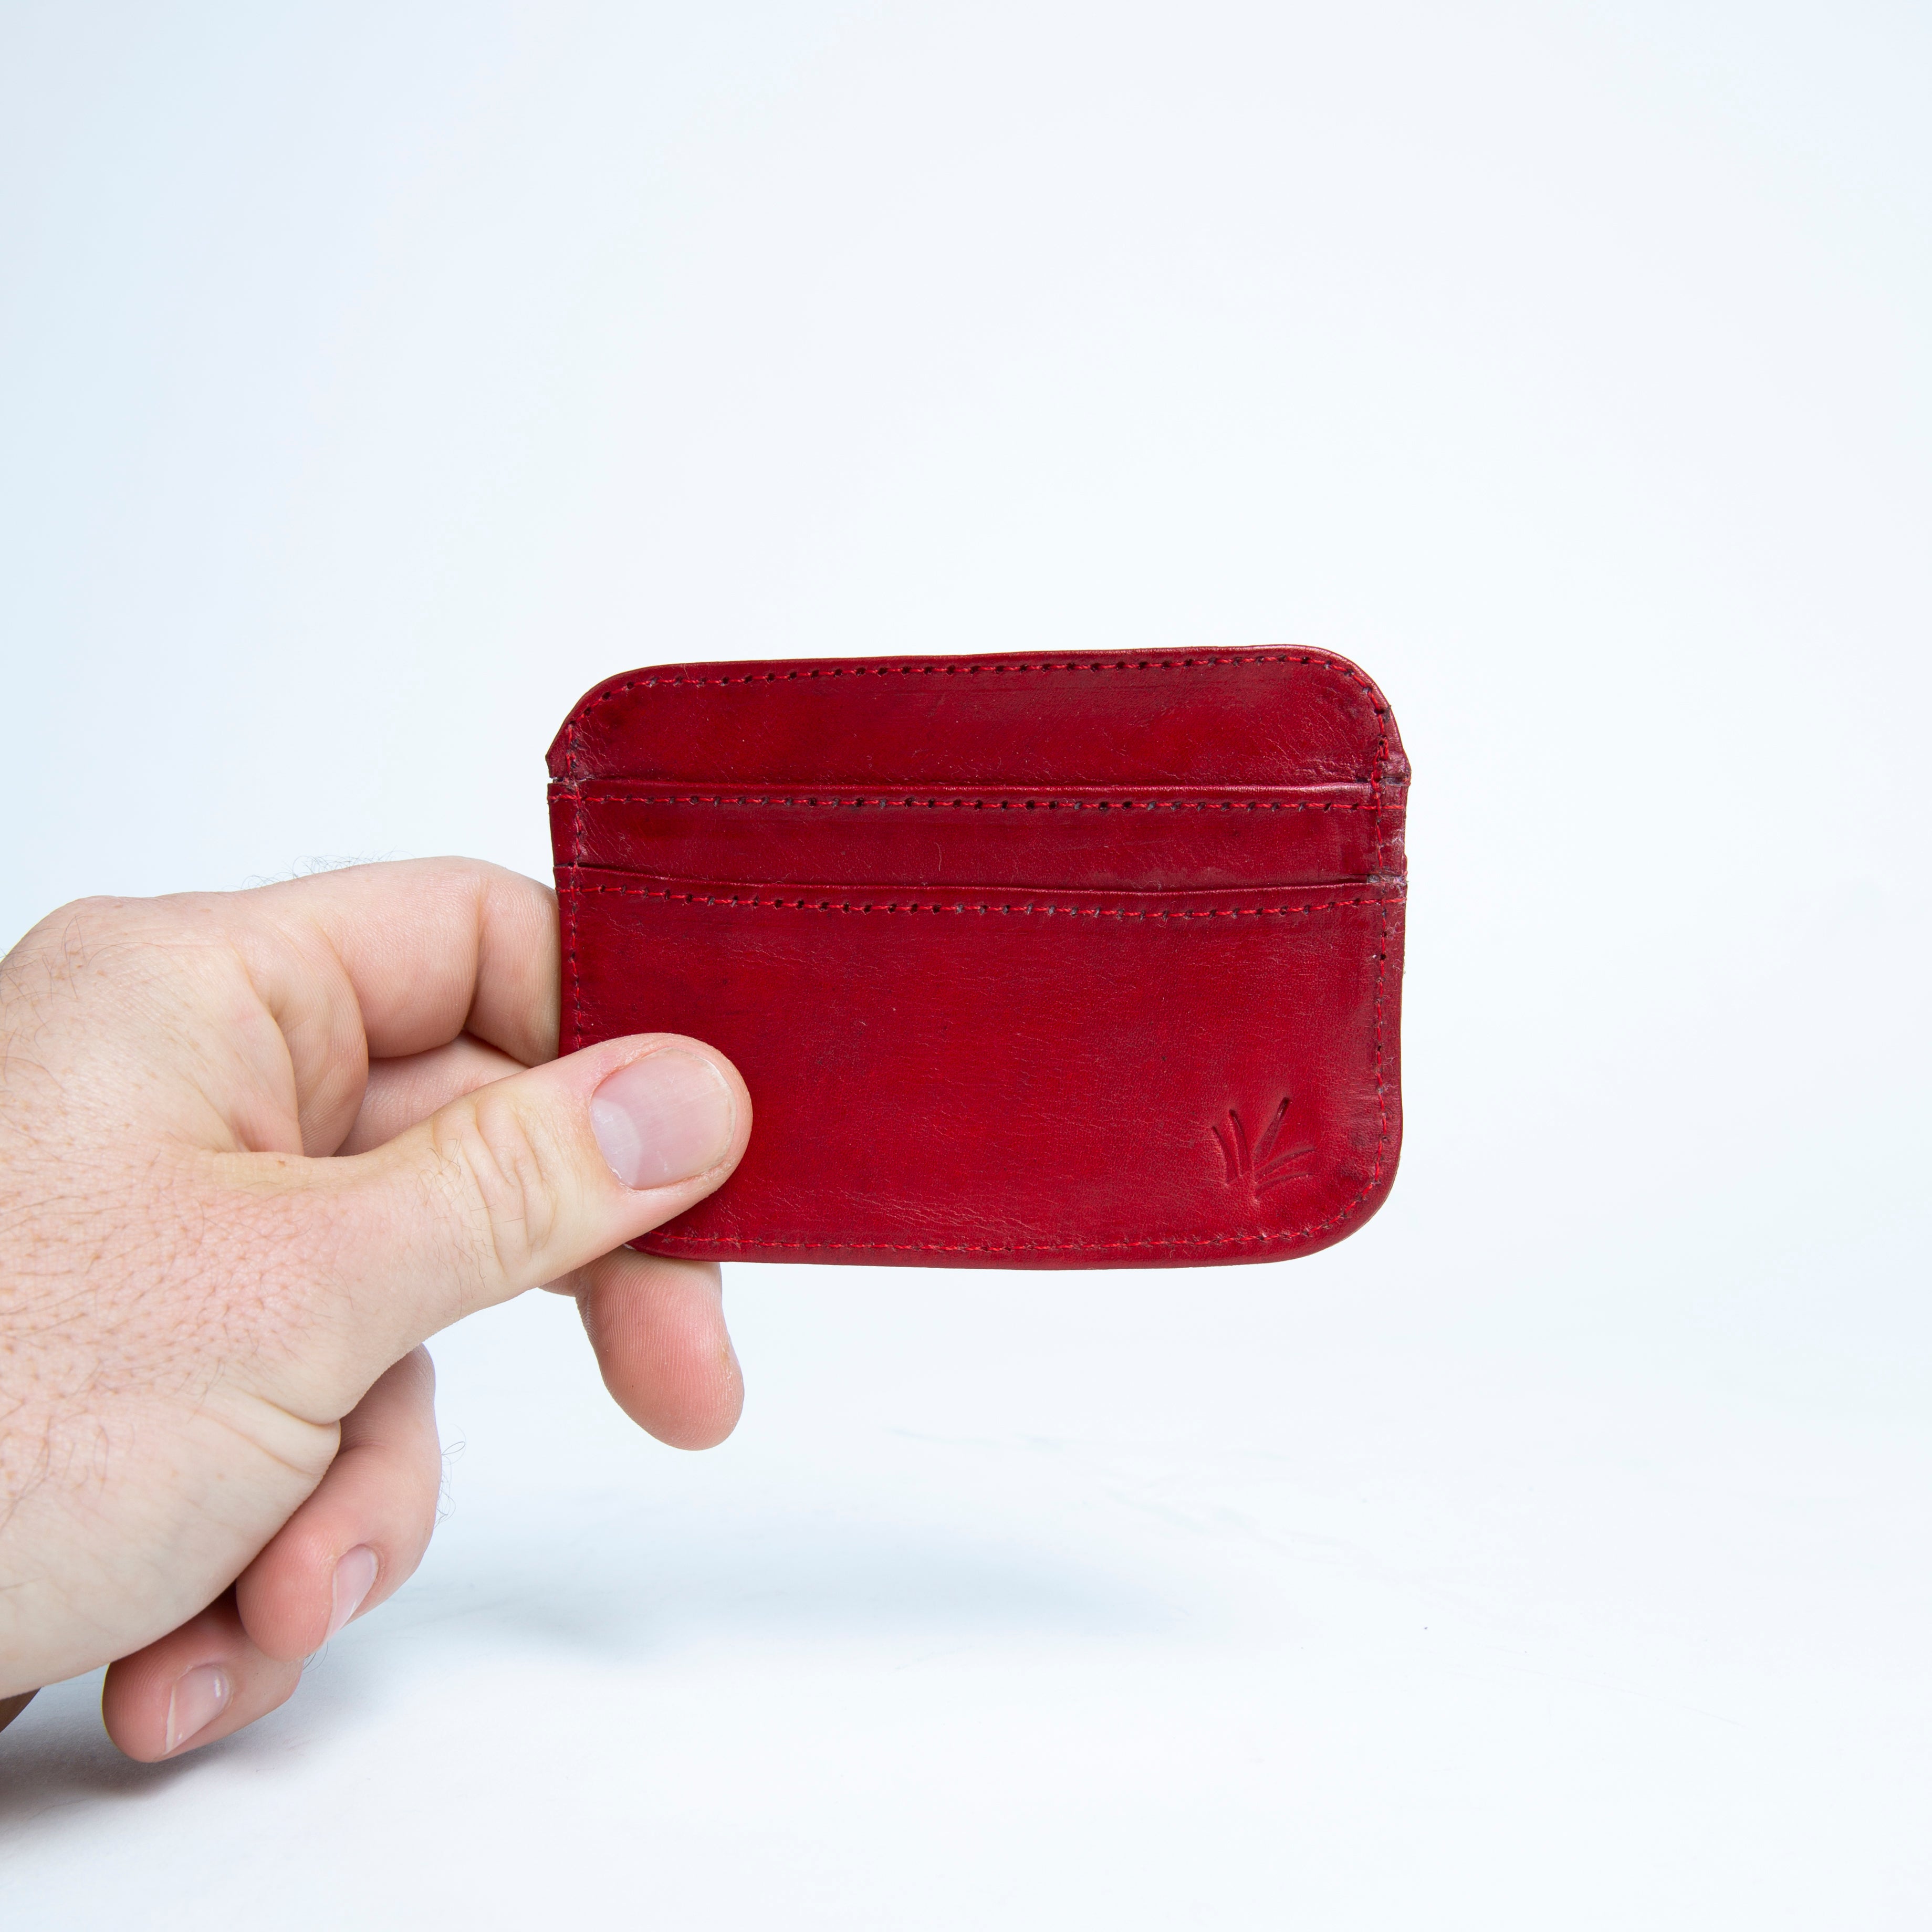 Bati | Red Leather Credit Card Wallet | Card Wallet | Credit Card Case | Leather Wallets | Mens Leather Wallet | Wallets for Women | Ladies Wallet | Small Wallet | Bifold Wallet | Wallet Purse | Bati Handmade Leather Wallets